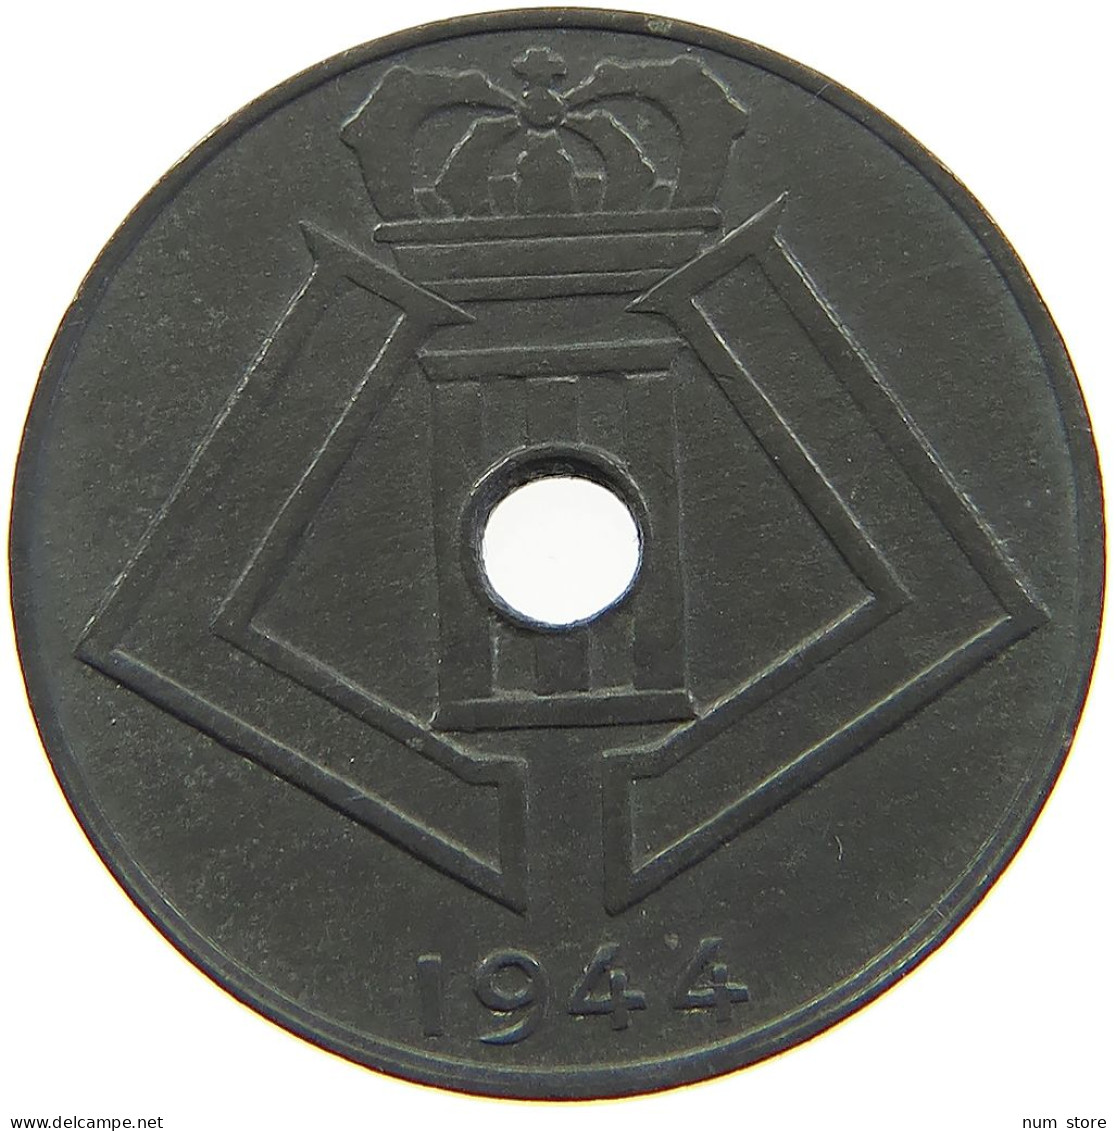 BELGIUM 10 CENTIMES 1944 LEOPOLD III. (1934-1951) #a086 0459 - 10 Cents